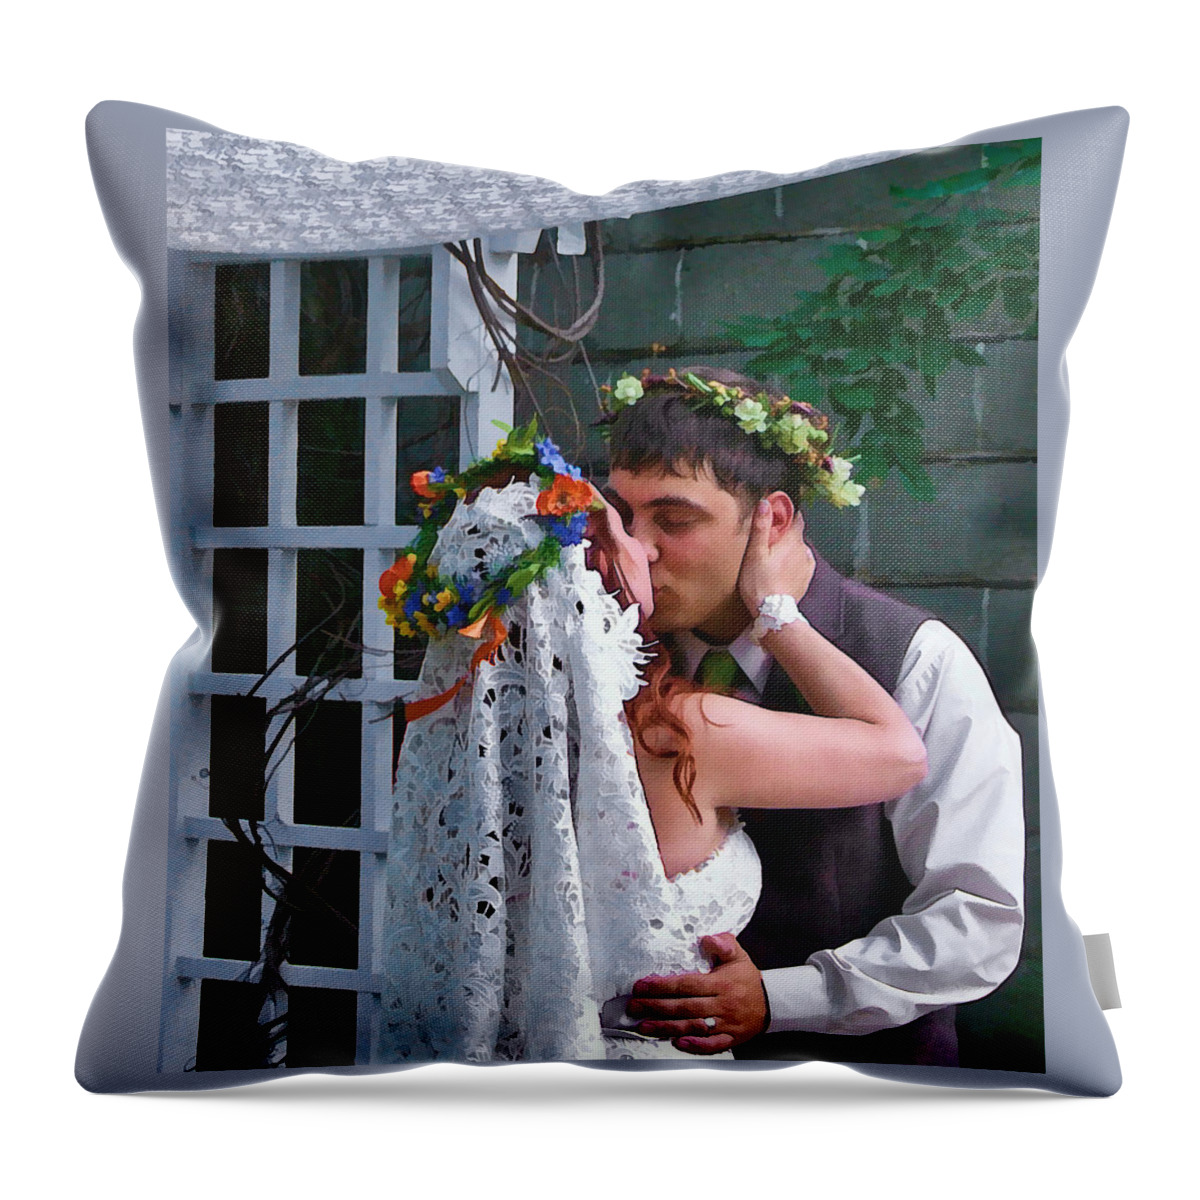  Kiss Throw Pillow featuring the photograph The Wedding Kiss by Ginger Wakem